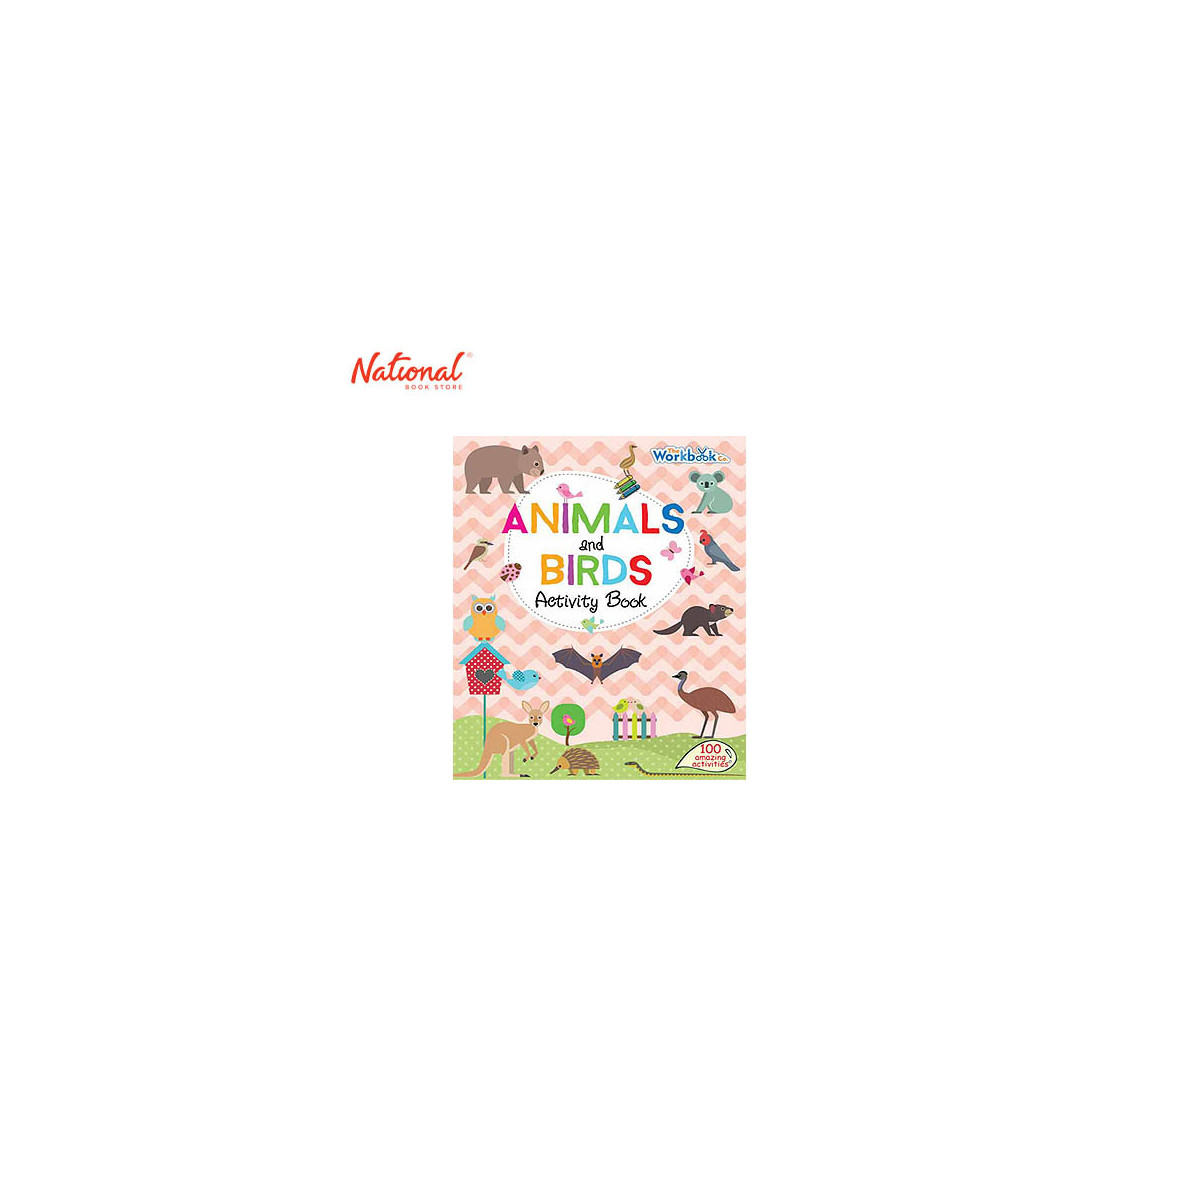 ASIA STICKER PAPER A4 80GSM 10S GLOSSY